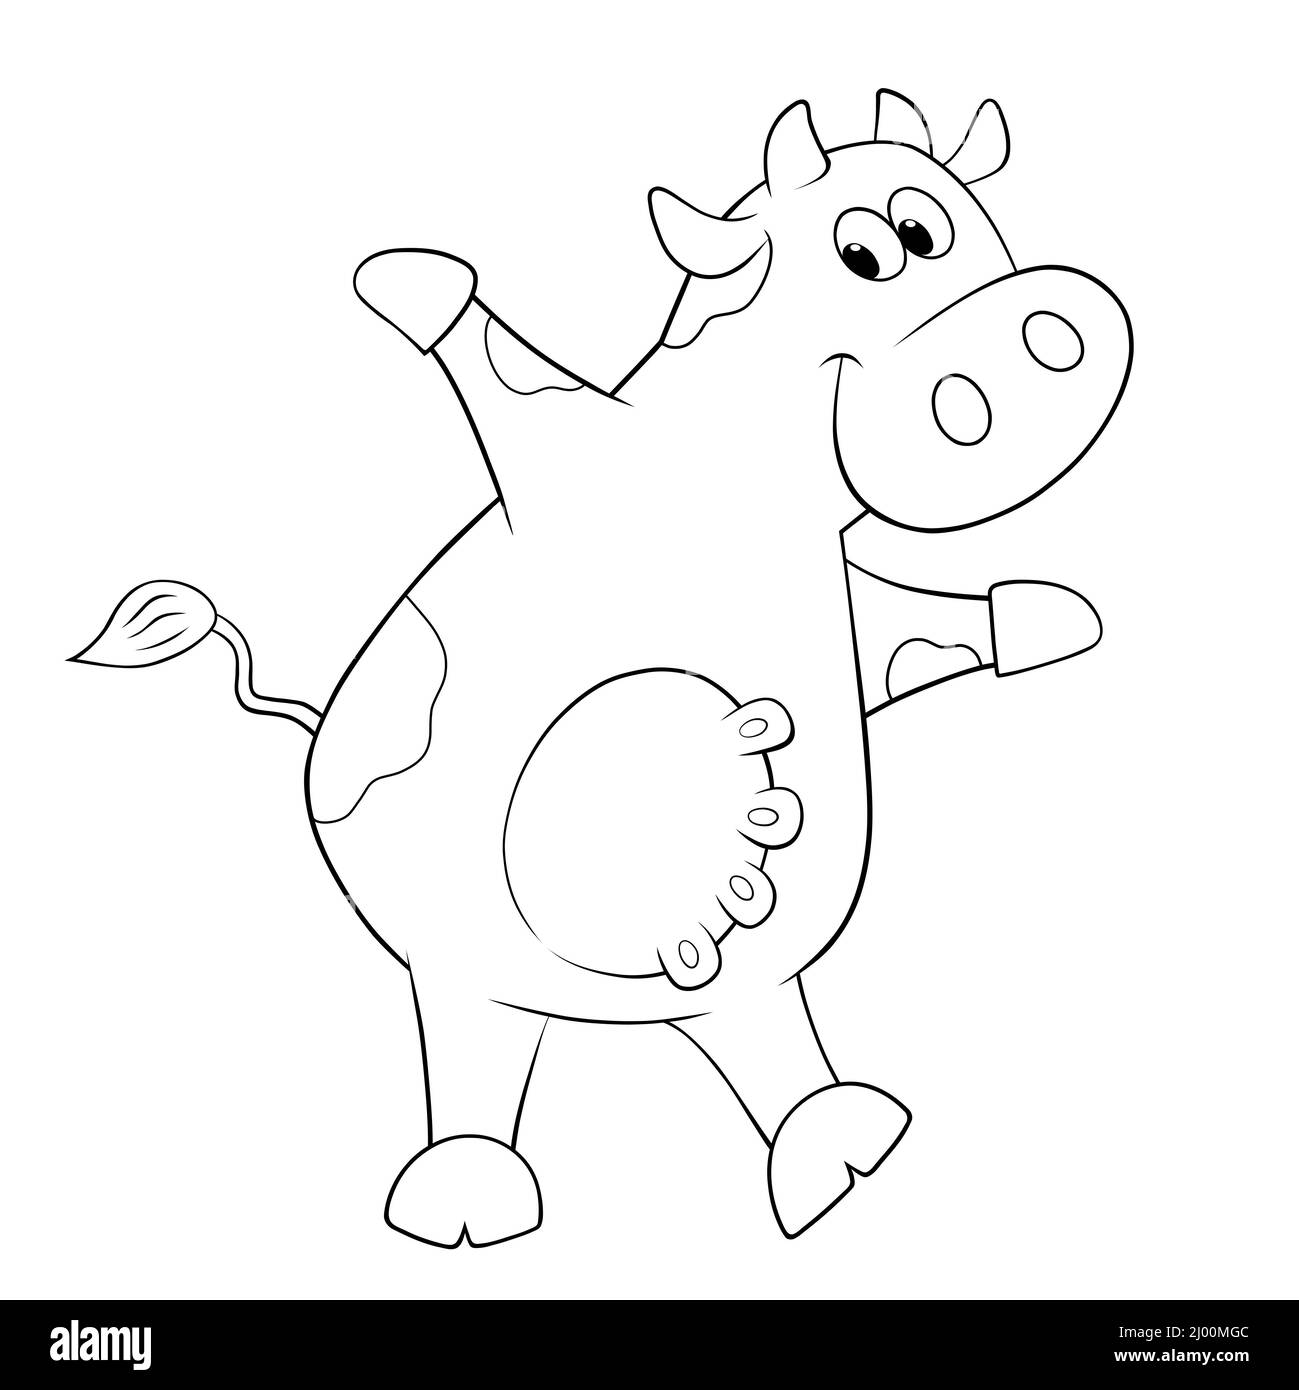 cute cow looking happy, with udders and standing on hind legs, cartoon farm animal character for coloring book for kids Stock Photo